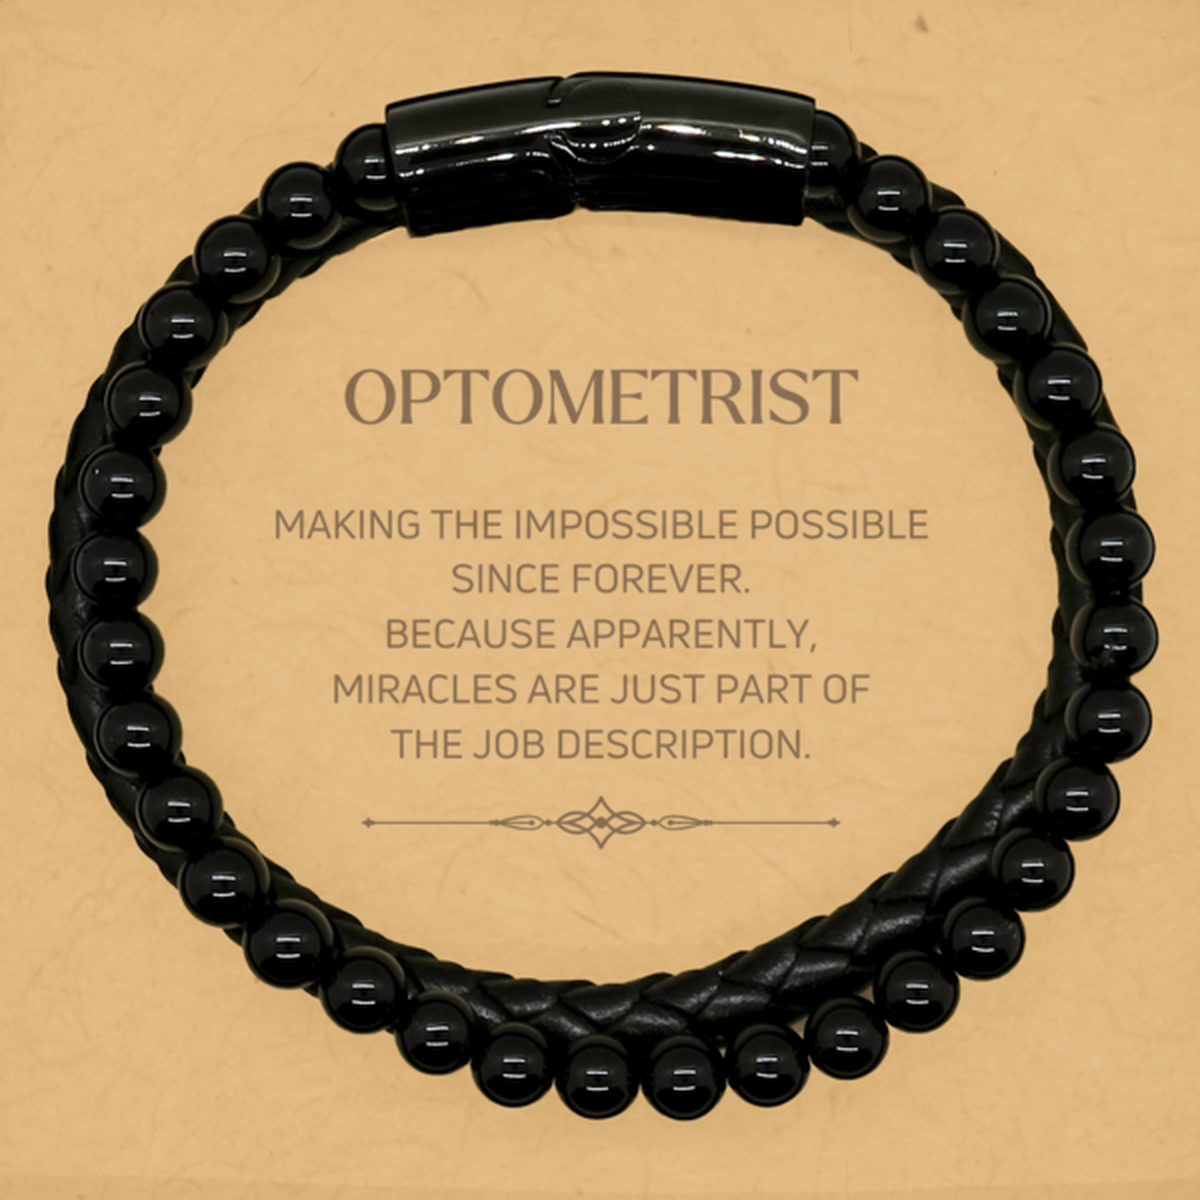 Funny Optometrist Gifts, Miracles are just part of the job description, Inspirational Birthday Stone Leather Bracelets For Optometrist, Men, Women, Coworkers, Friends, Boss